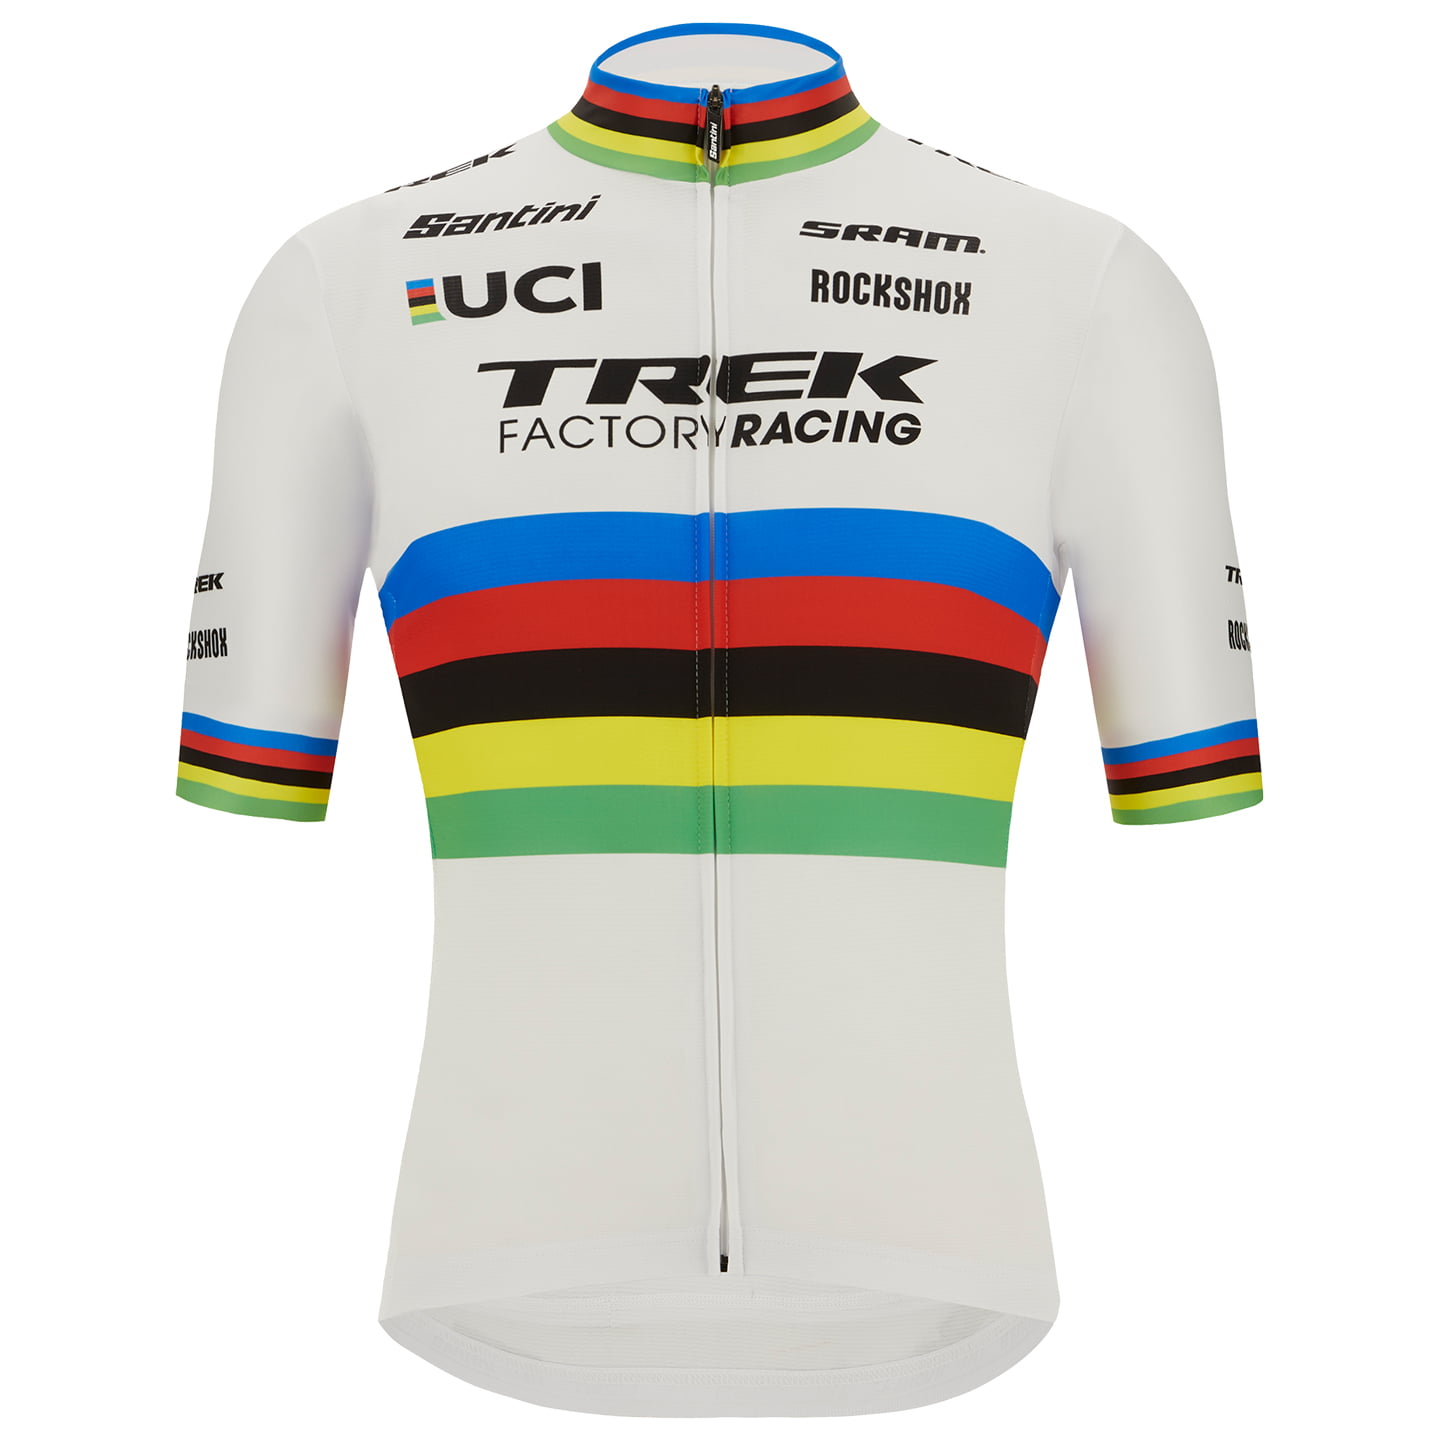 TREK FACTORY RACING XC World Champion 2022 Short Sleeve Jersey, for men, size M, Cycle jersey, Cycling clothing